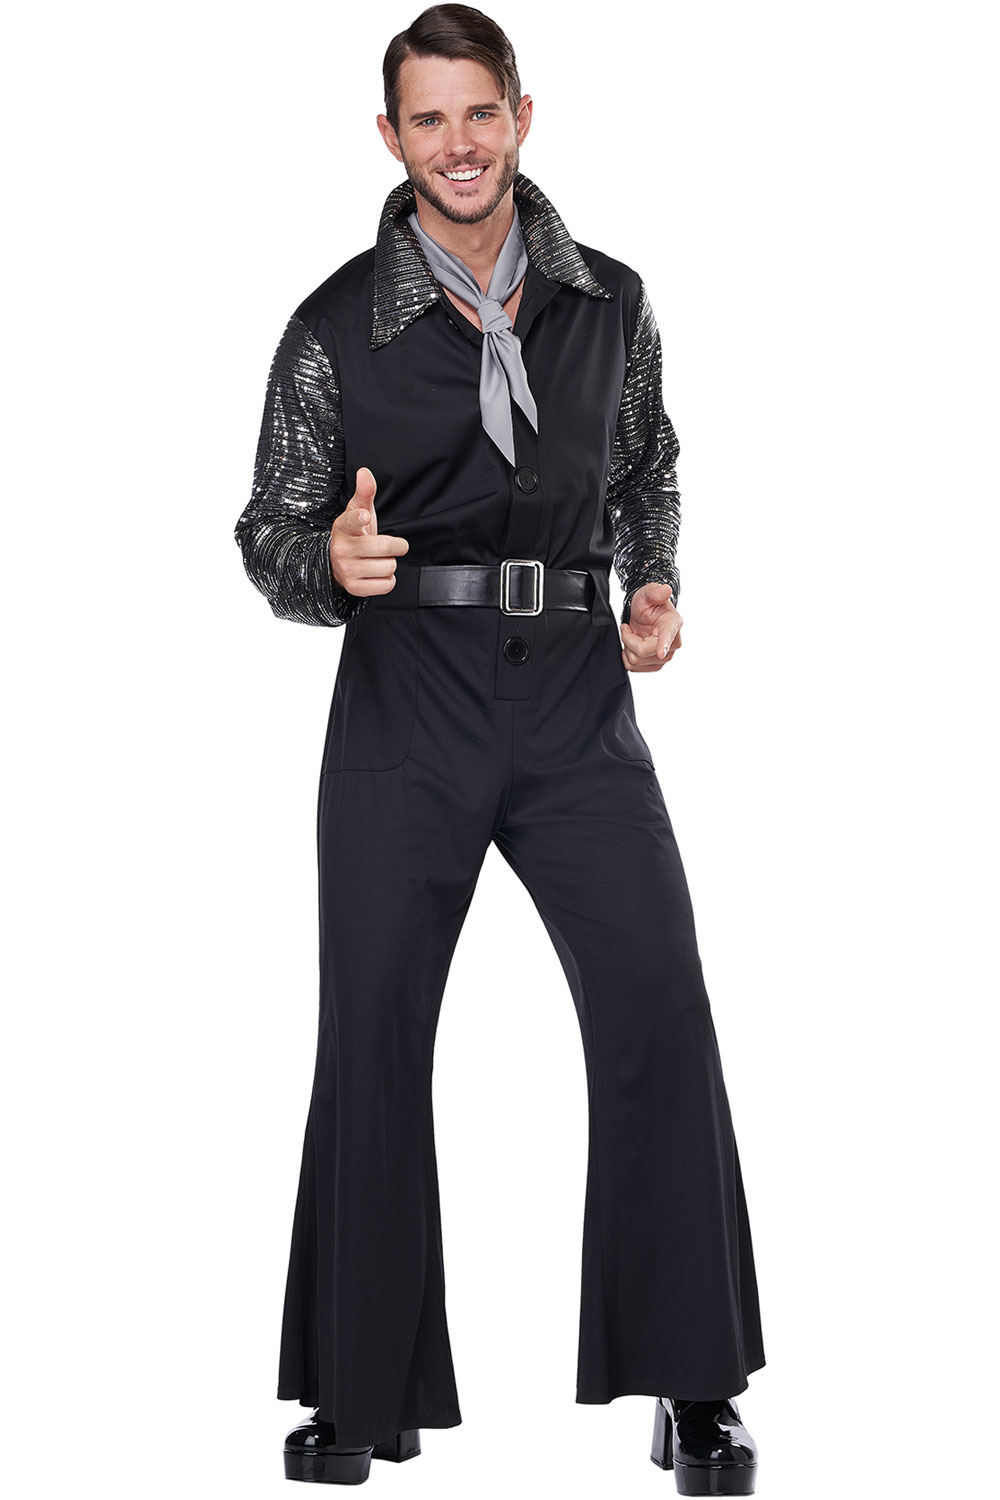 California Costume Flashy 70s Jumpsuit Adult Men Disco Halloween outfit ...